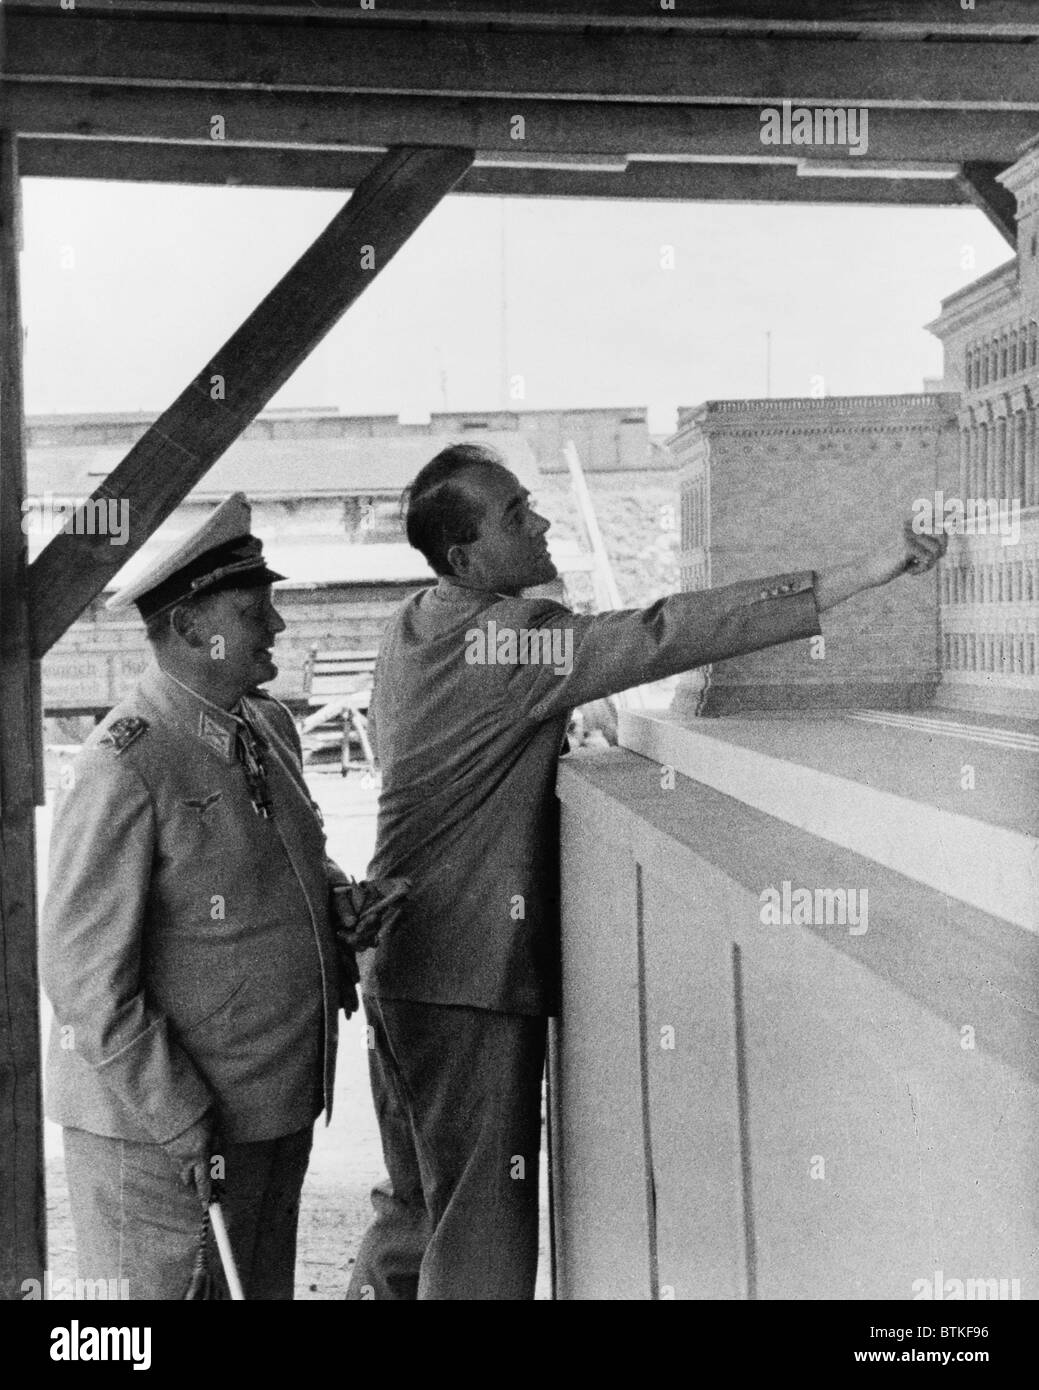 Albert Speer (1905-1981), Adolf Hitler's favored architect, pointing out details of an architectural model for Reichsmarschall ministry to Hermann Goring (1893-1946). Stock Photo